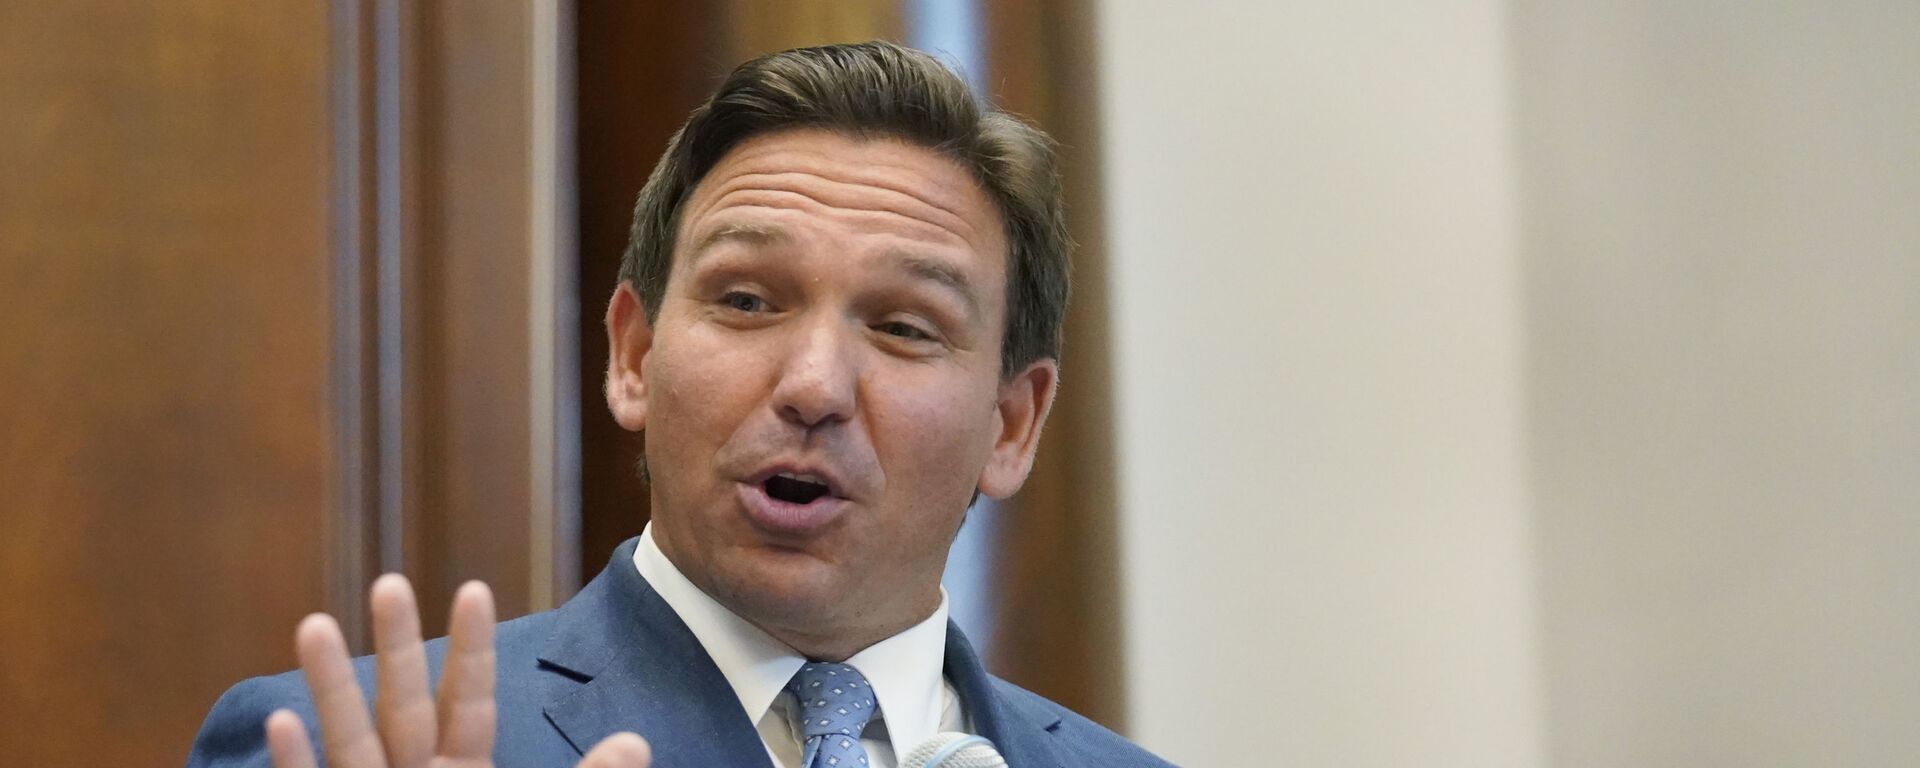 Florida Gov. Ron DeSantis gestures as he speaks, Monday, June 14, 2021, at the Shul of Bal Harbour, a Jewish community center in Surfside, Fla. DeSantis visited the South Florida temple to denounce anti-Semitism and stand with Israel, while signing a bill into law that would require public schools in his state to set aside moments of silence for children to meditate or pray - Sputnik International, 1920, 25.10.2021